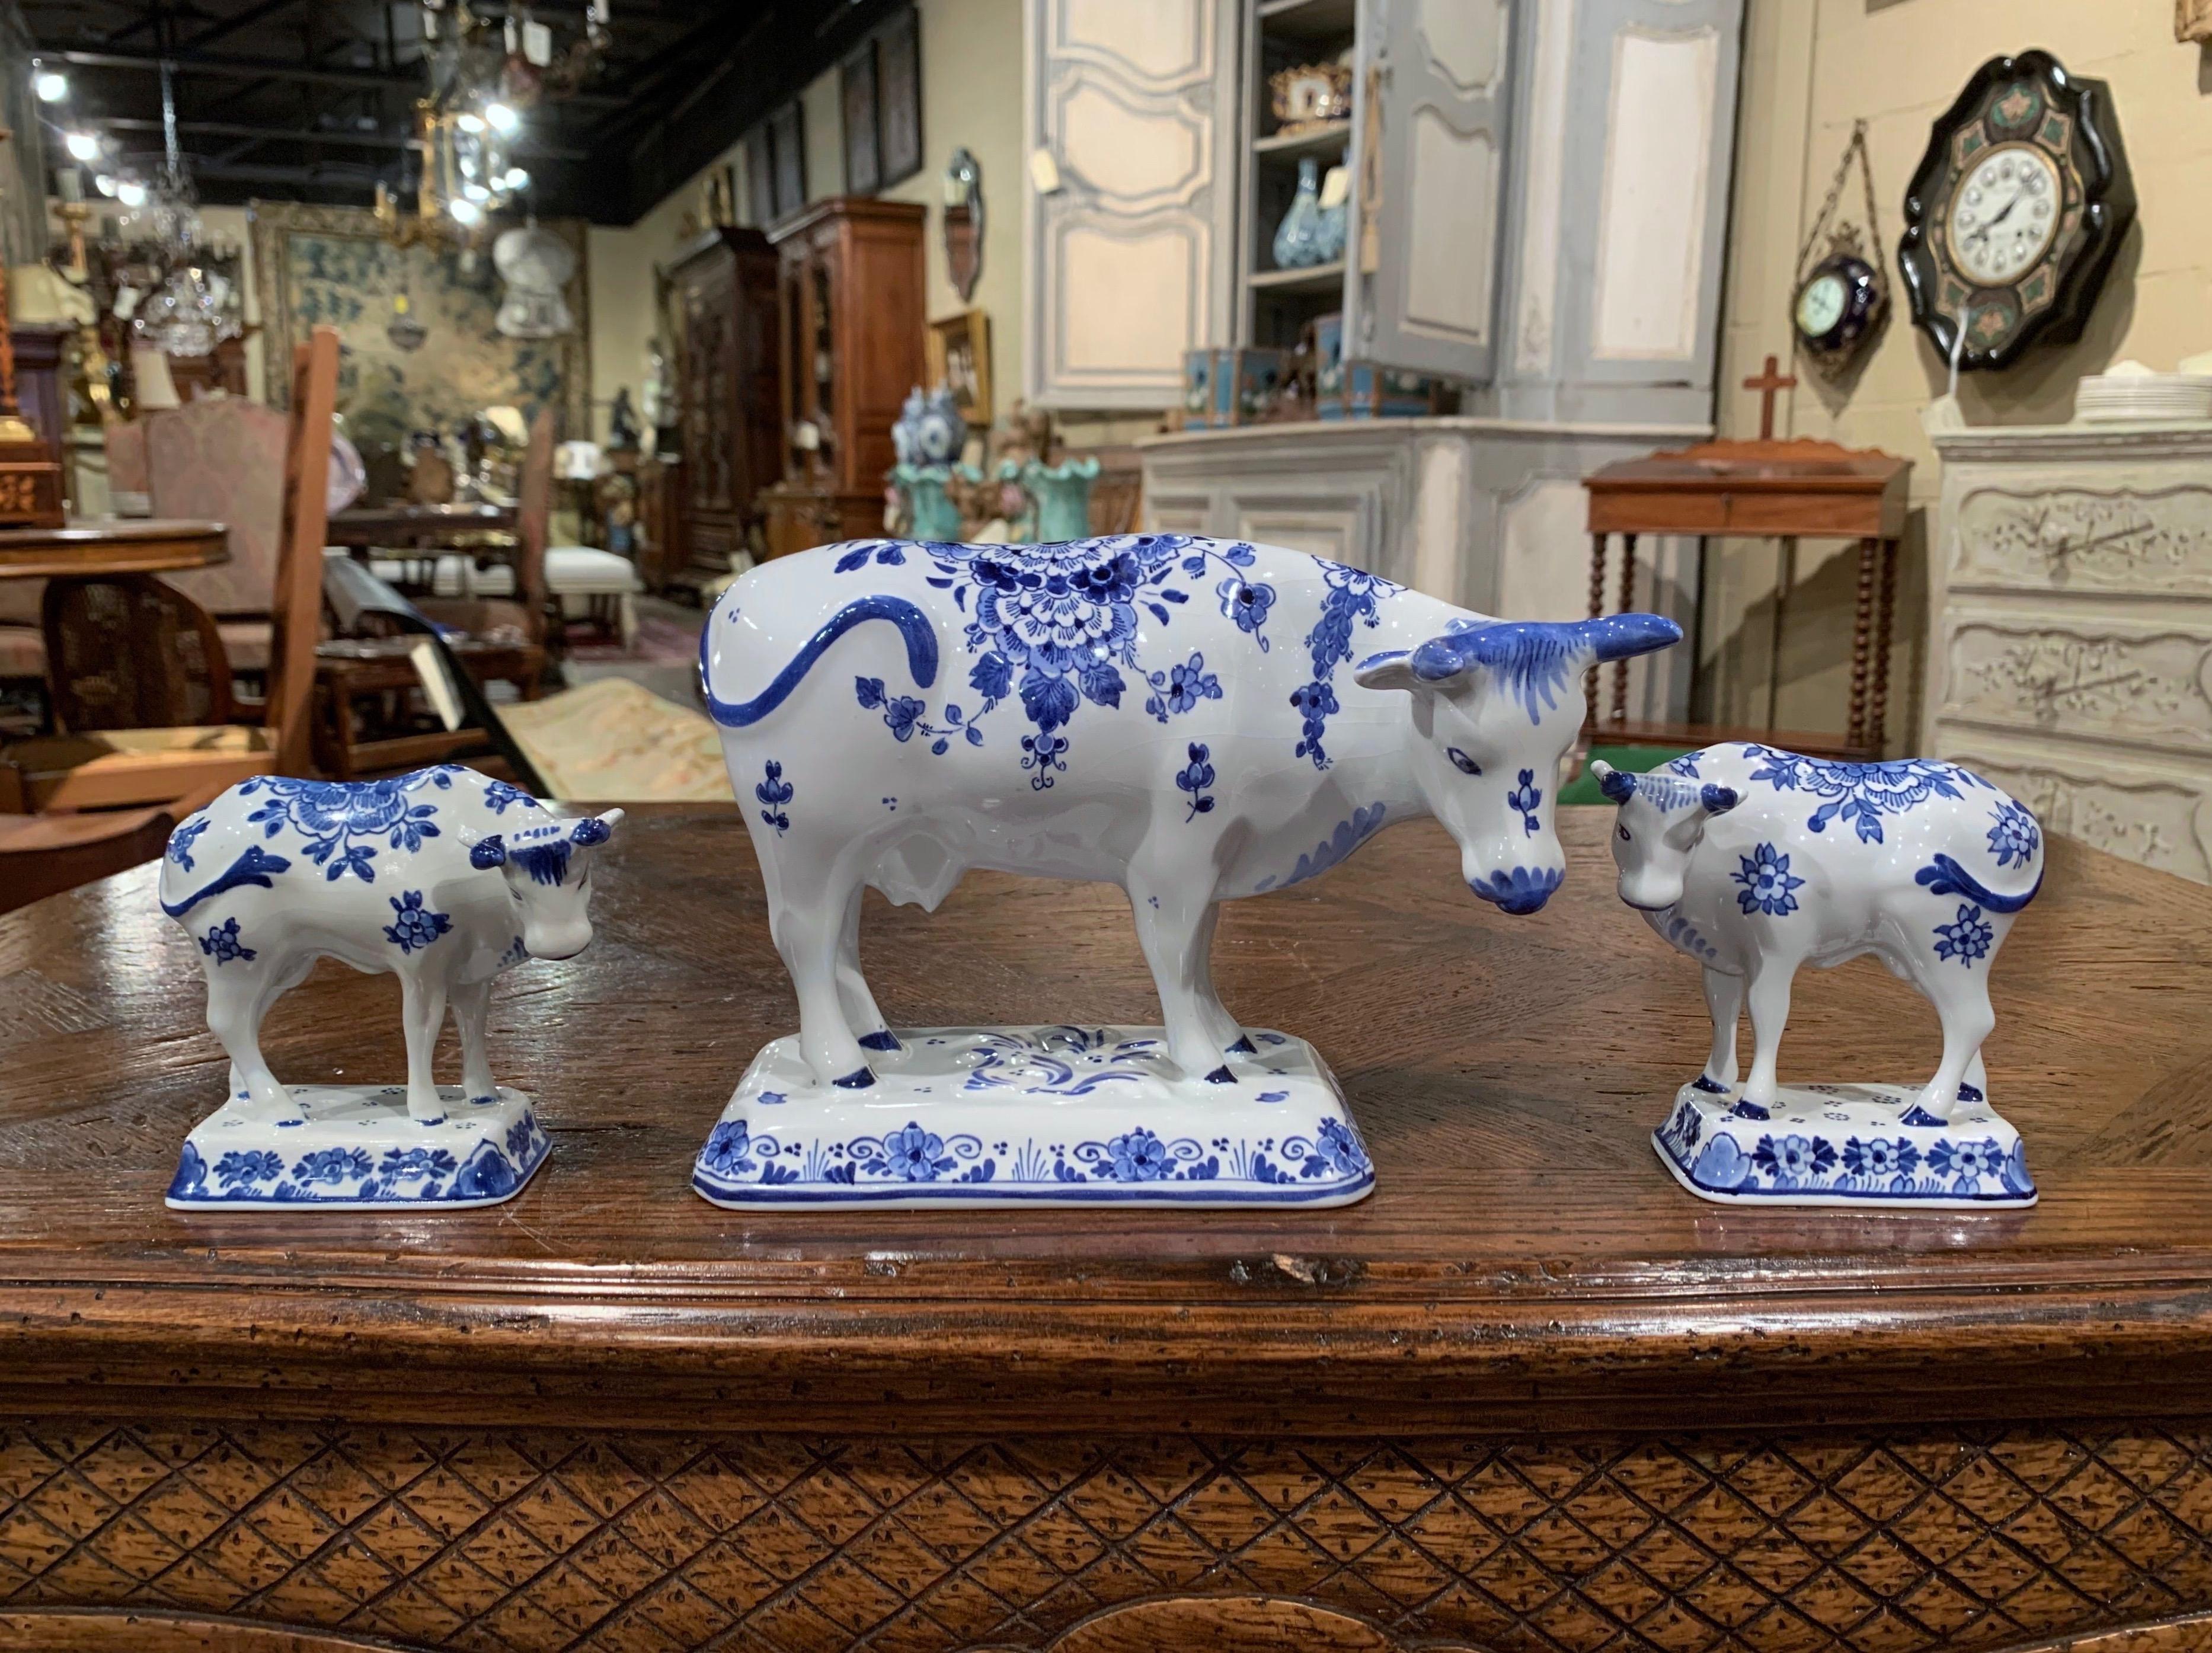 Crafted in Holland circa 1960, the three porcelain cow sculptures are hand painted in the traditional Delft blue and white colors. Each bovine figure is stamped on the bottom 